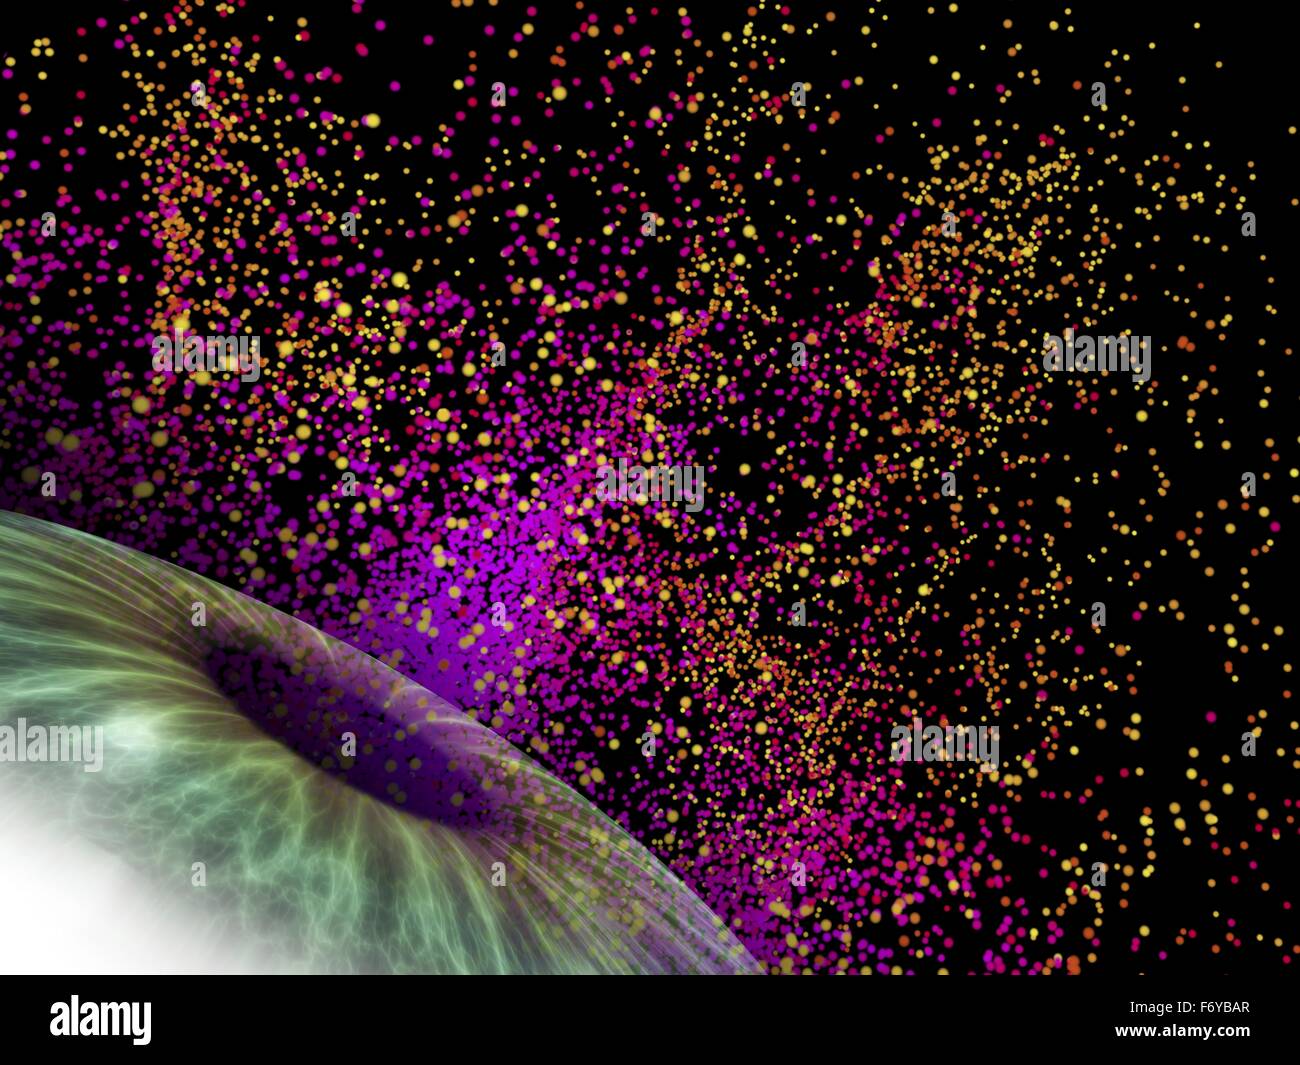 Computer artwork of a human eye, overlaid colourful particles, depicting fantasy, imagination, dreaming, physics, light or stars. Stock Photo